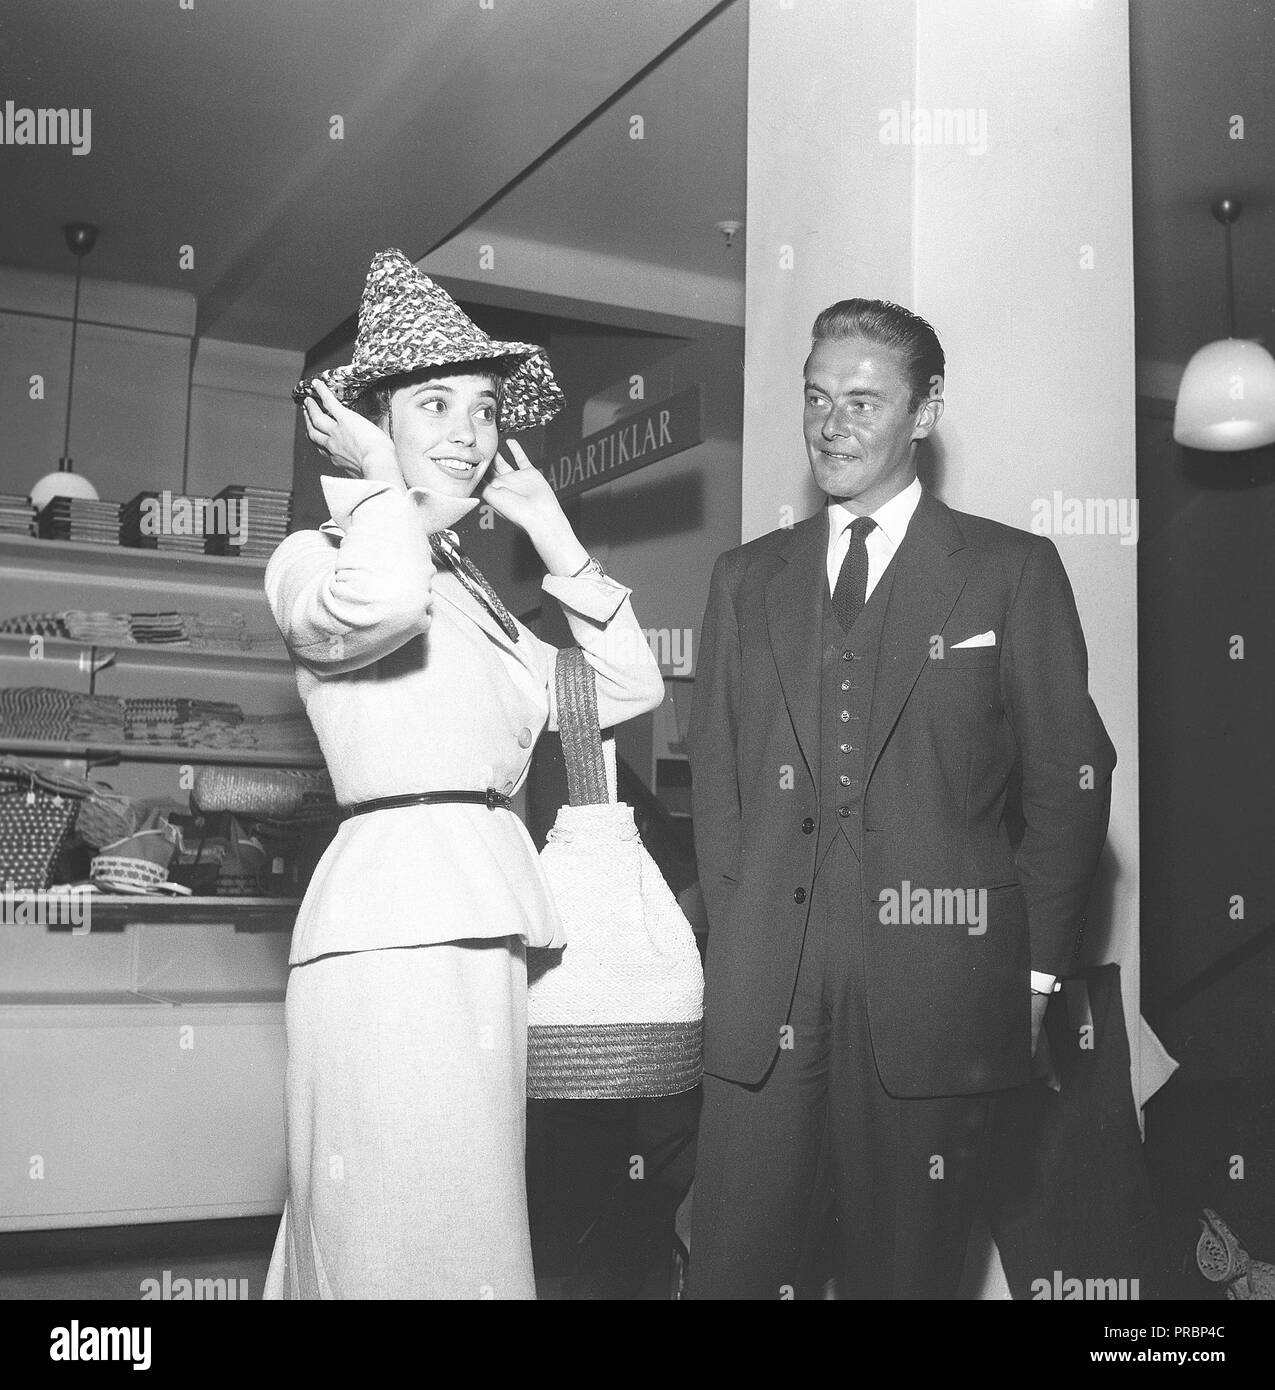 1950s fashion. Swedish actress Margit Carlqvist, born 1932 is trying on a hat while a man is standing beside her looking at her. Sweden 1956. Ref BX34-6 Stock Photo